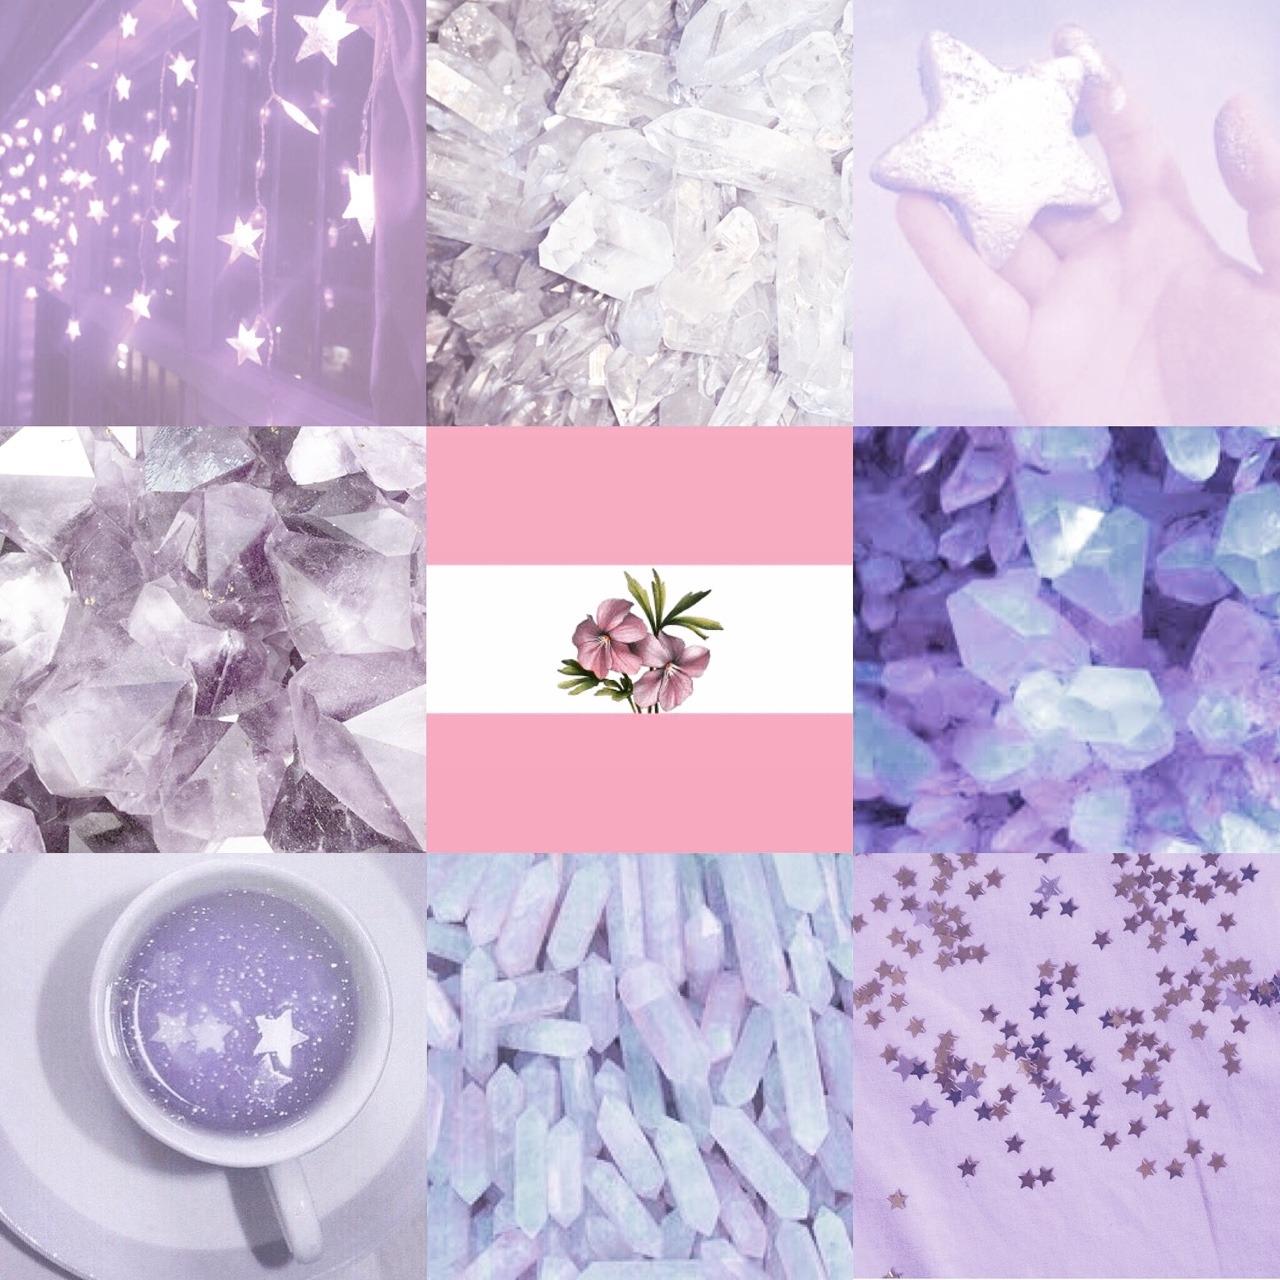 carla on X: #outfits #tumblr #aesthetic #Purple  /  X